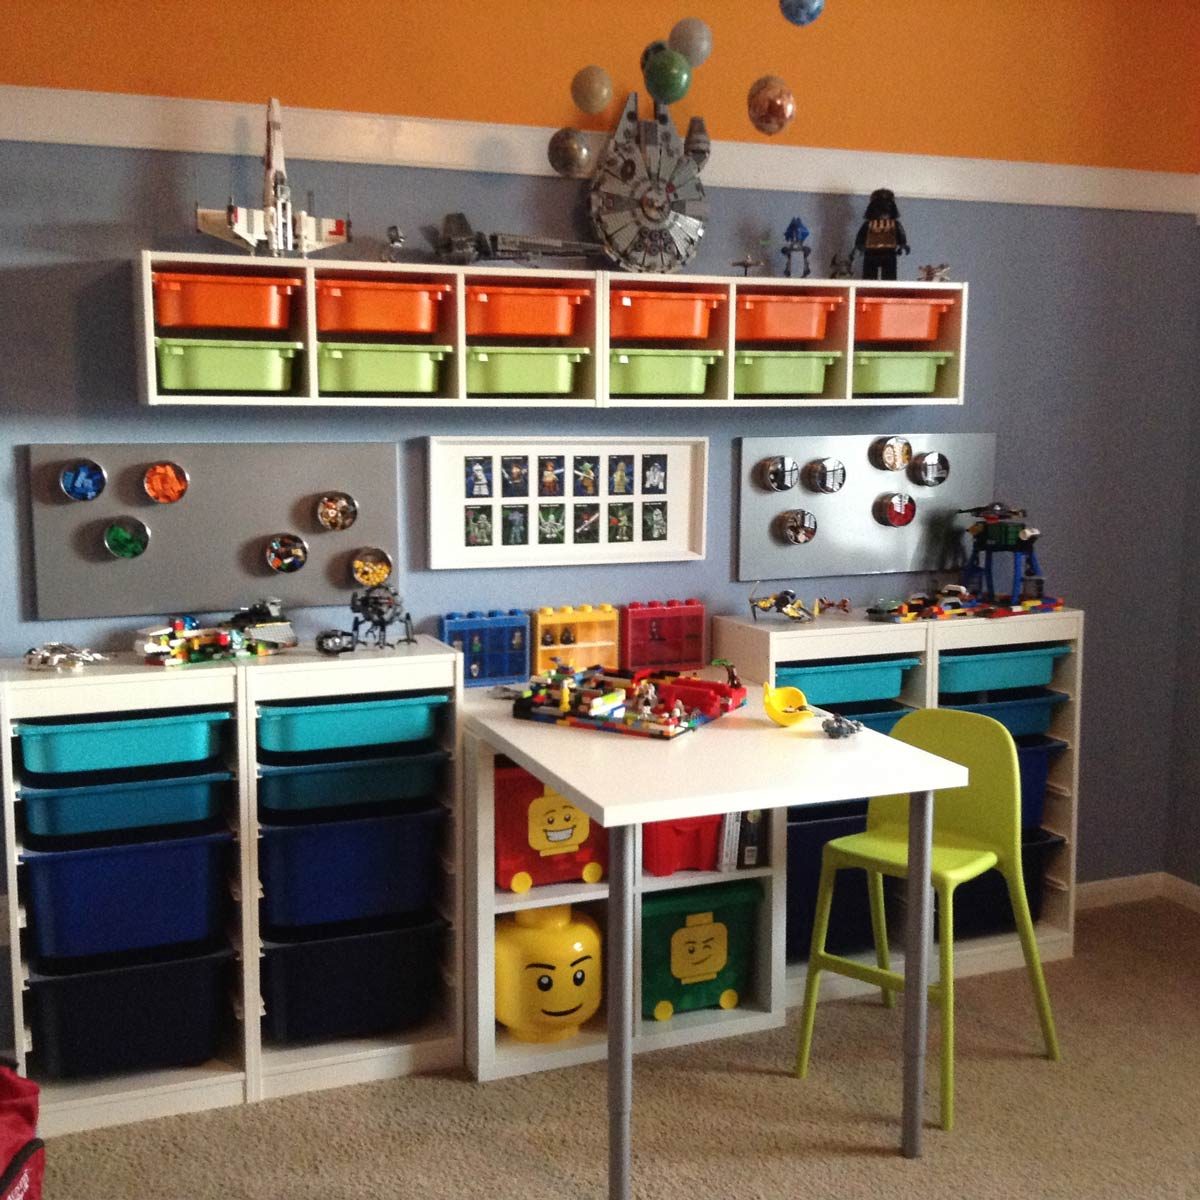 Top LEGO You've Got to See — The Family Handyman